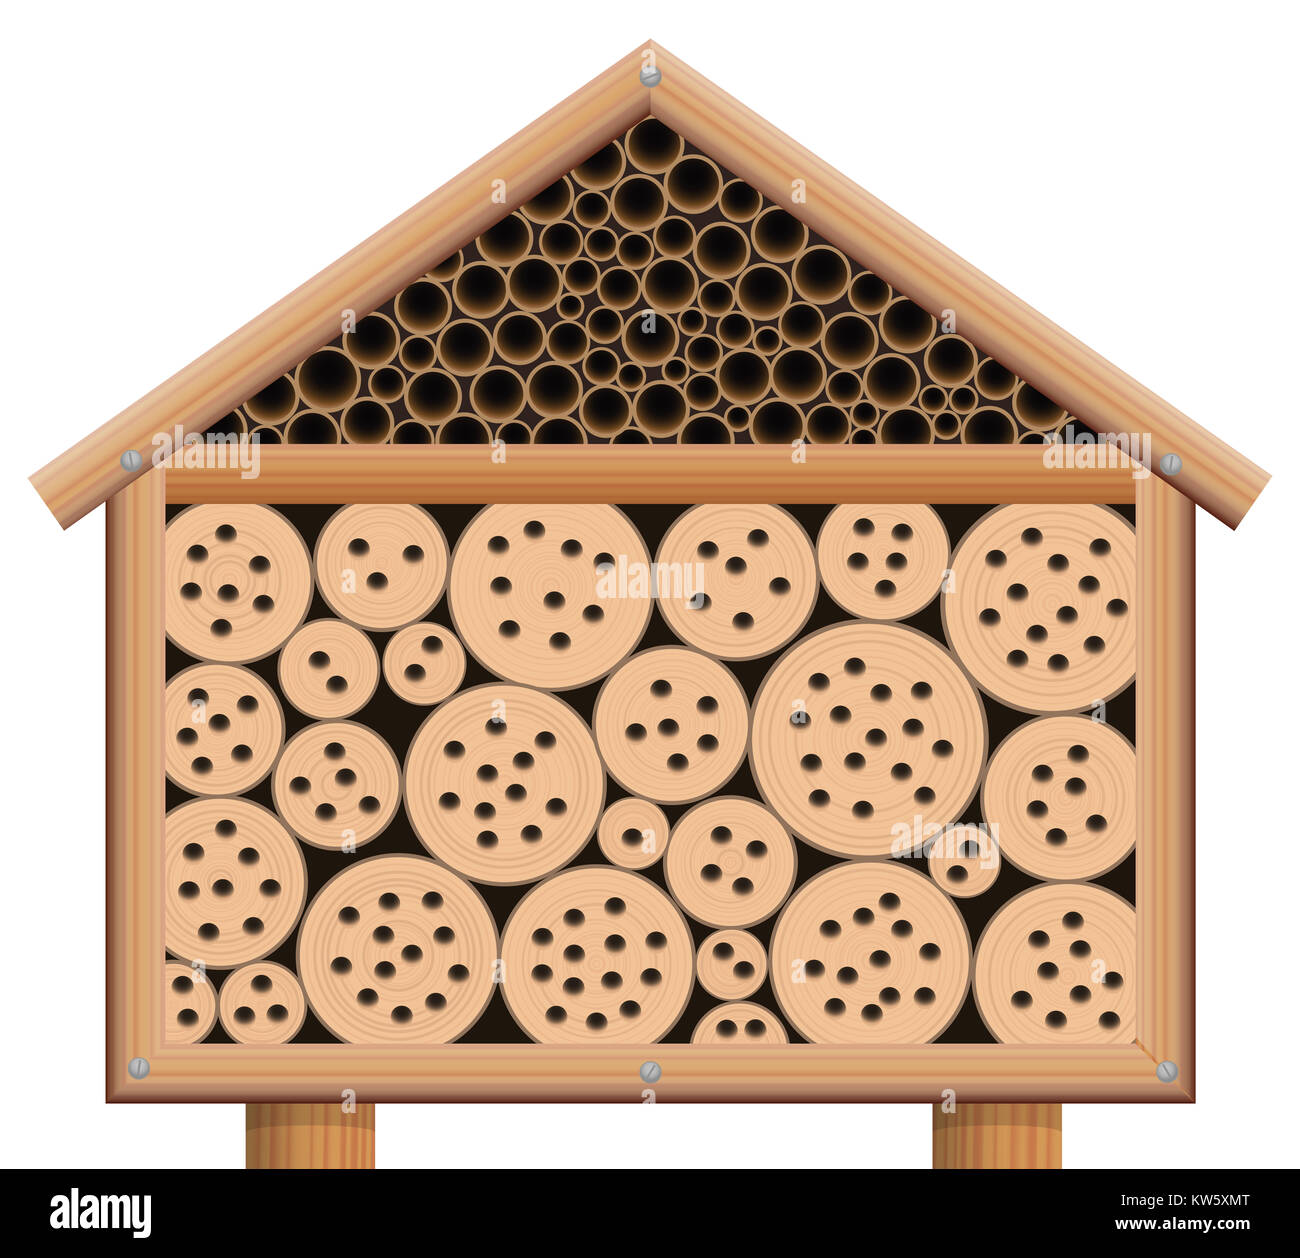 Insect hotel - wooden bug house with roof - illustration on white background. Stock Photo